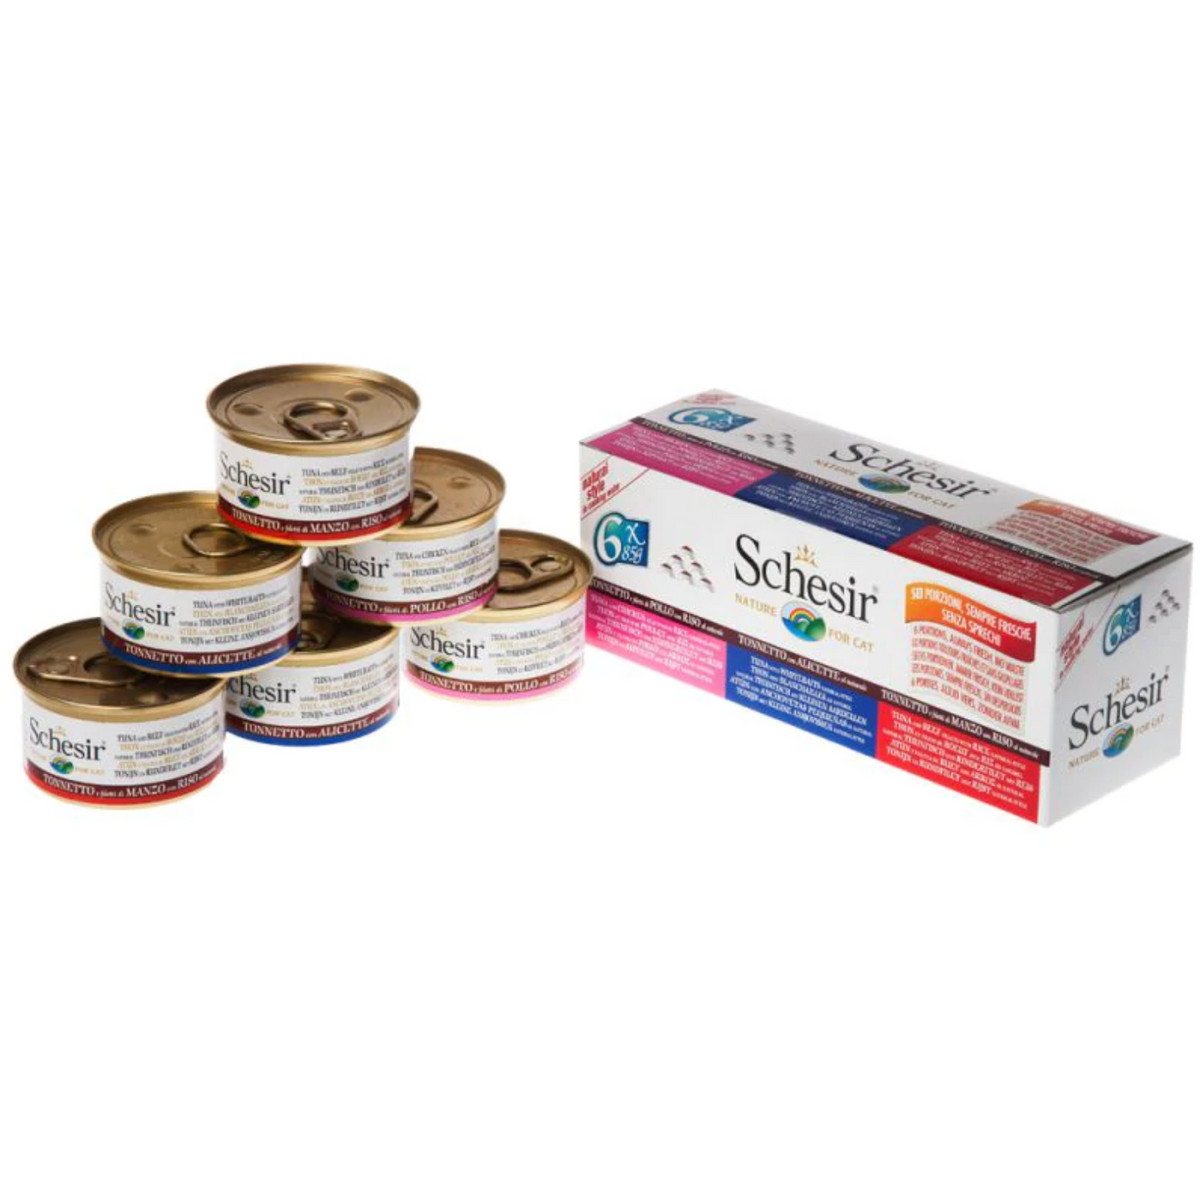 Schesir Multipack in Cooking Water - 6 Pack of Wet Canned Cat Food (6 x 85g)